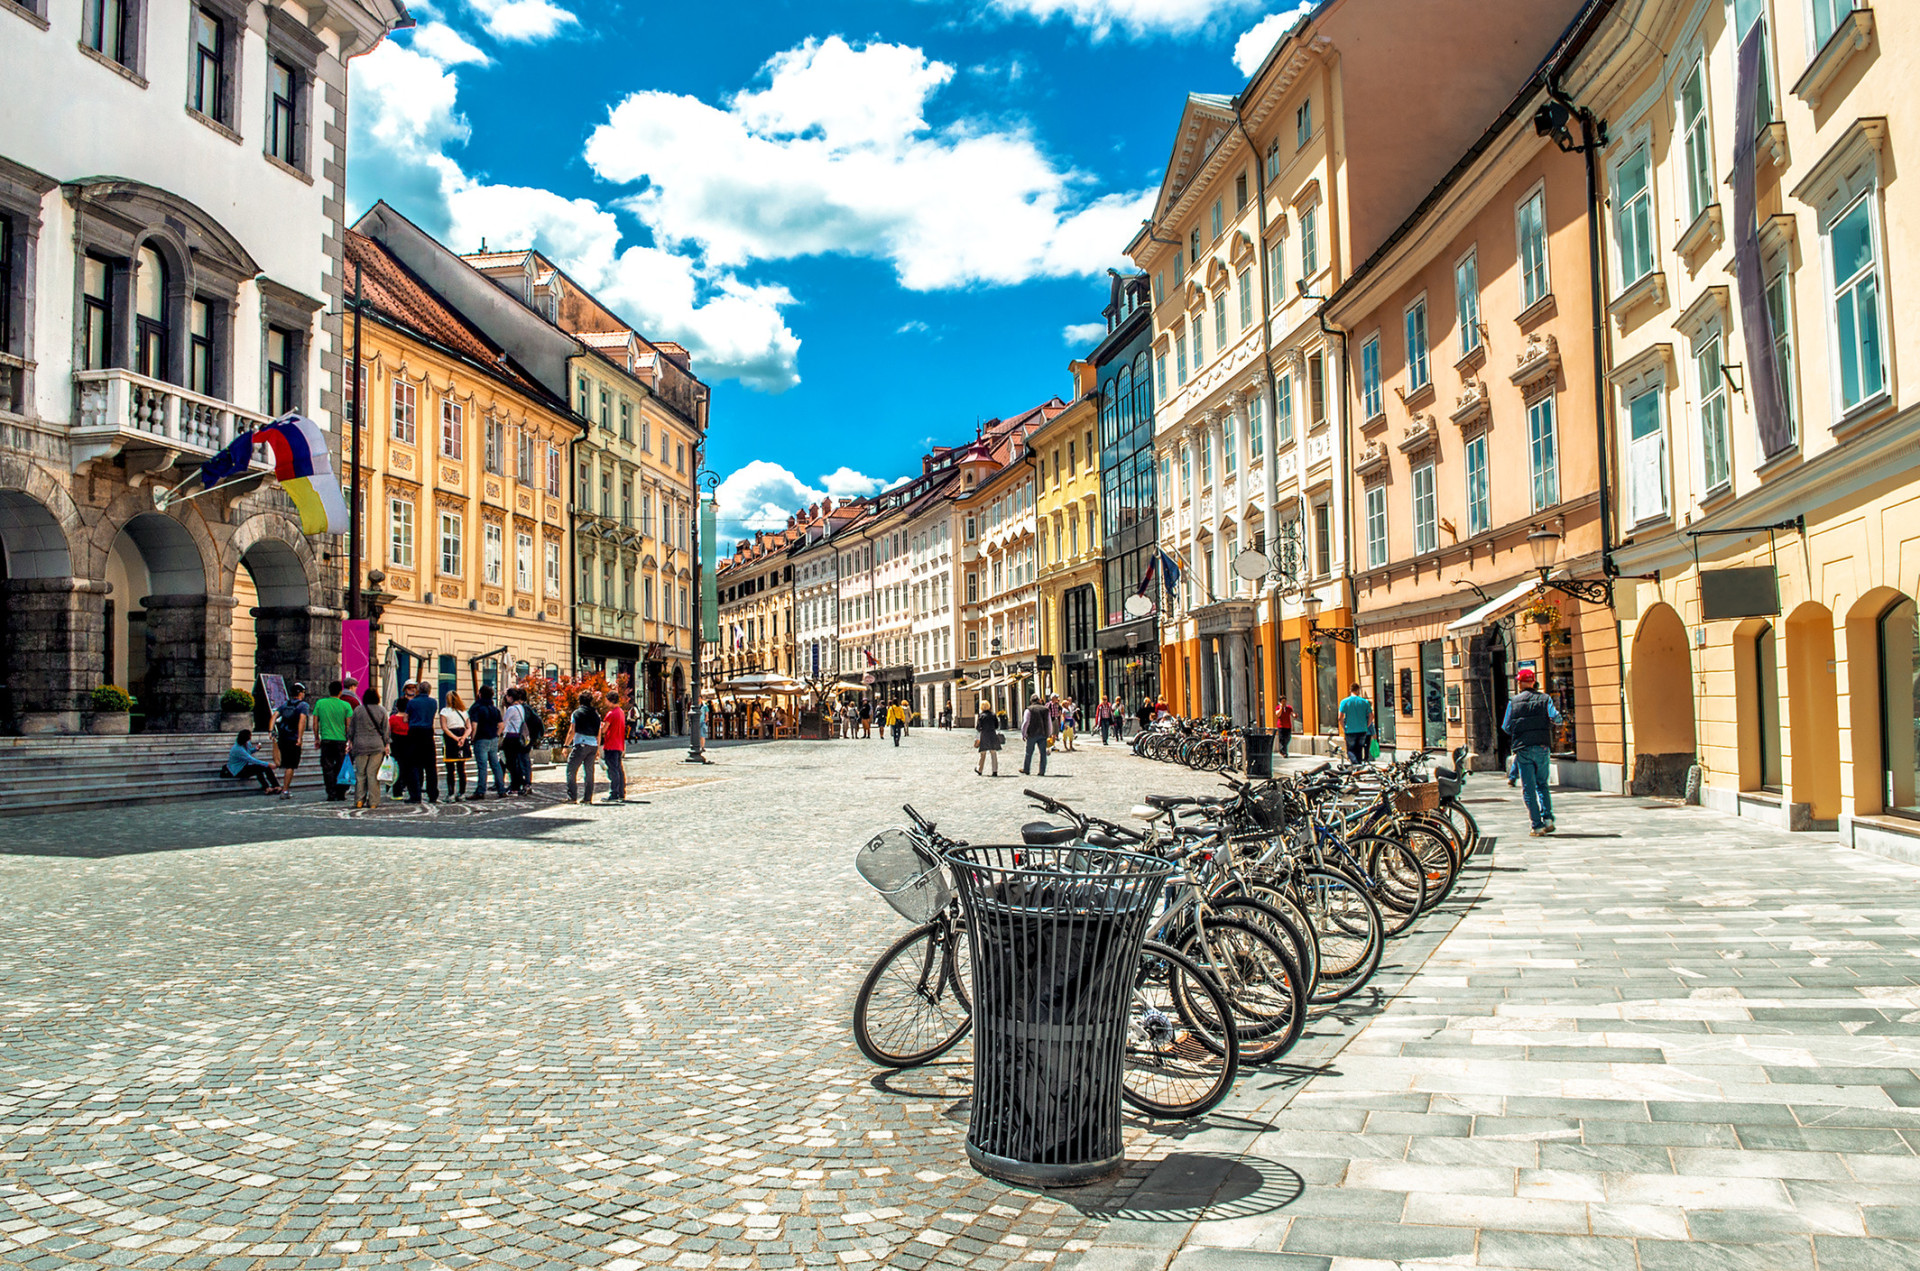 Slovenia's capital boasts of green spaces, open avenues, and charming shops and eateries.